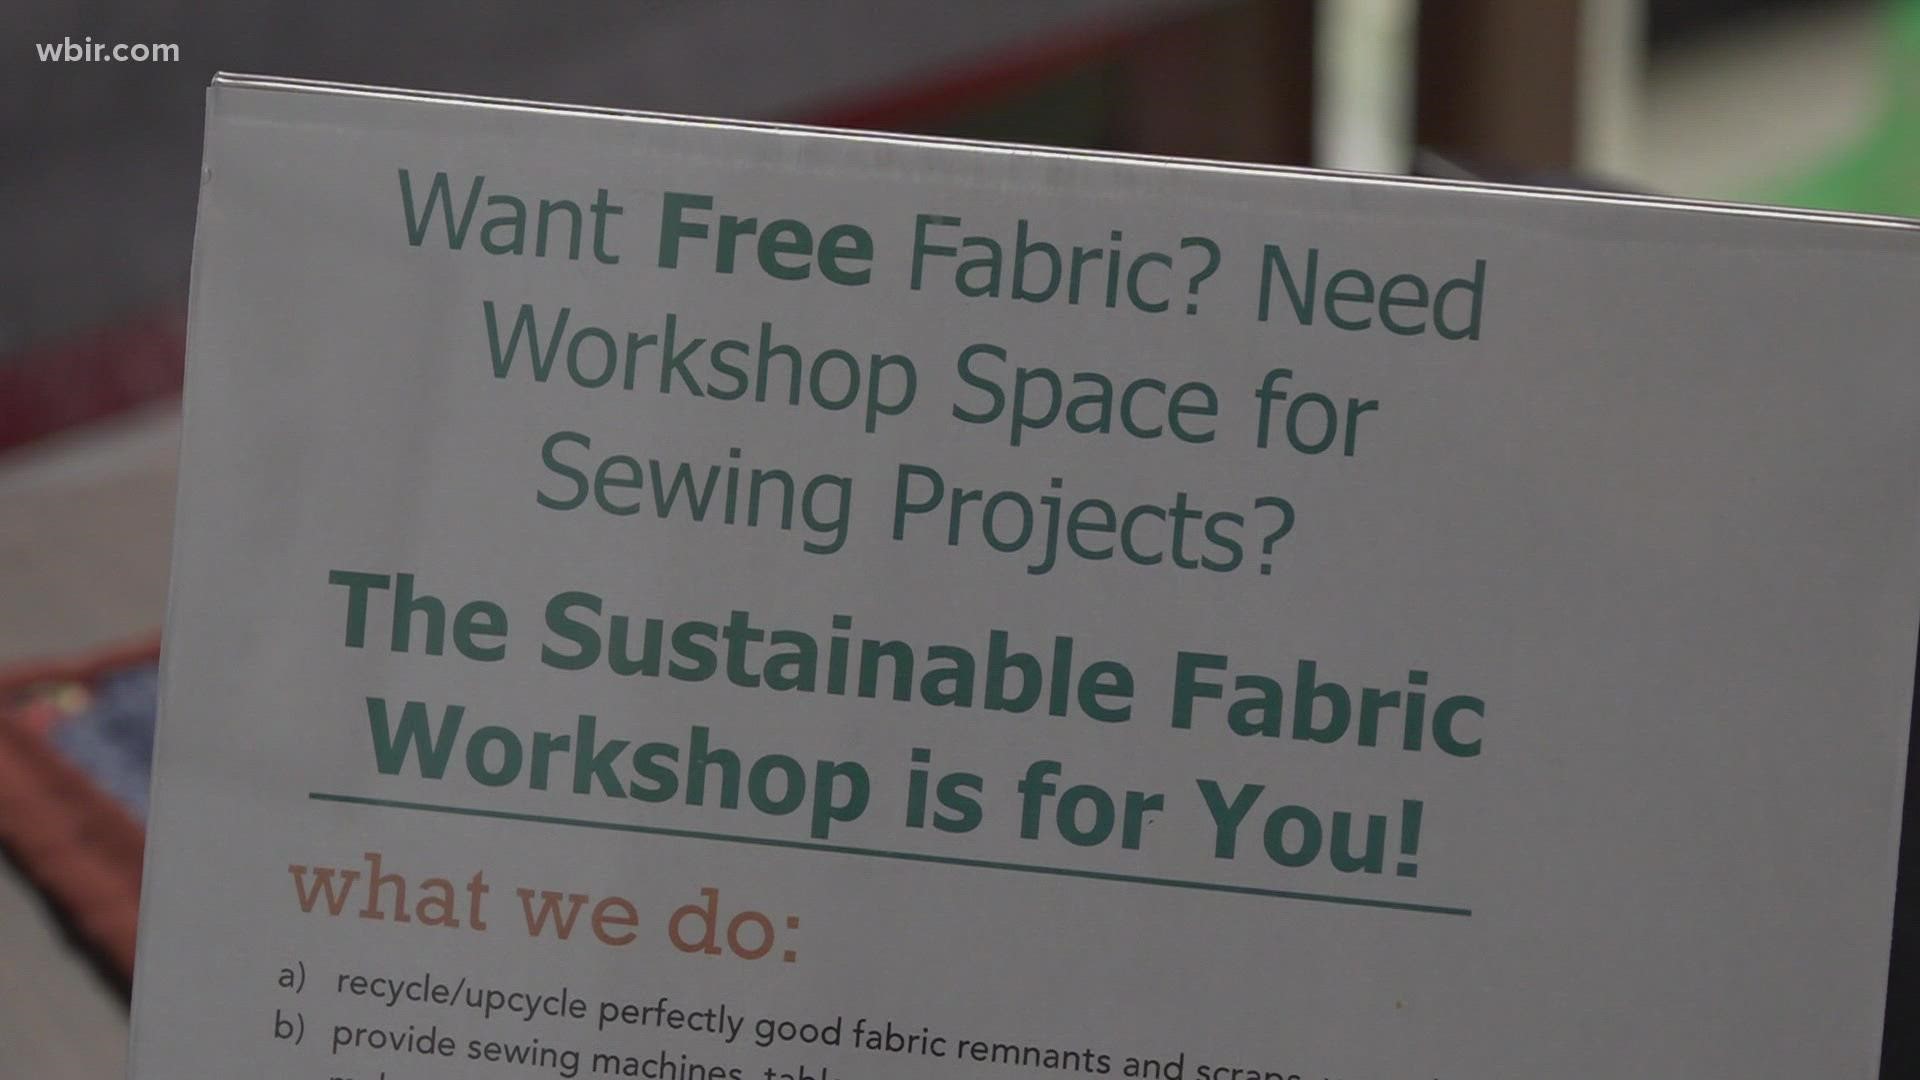 The Sustainable Fabric Workshop is a weekly event at the South Knoxville Community Center that functions as an alternative to craft stores.